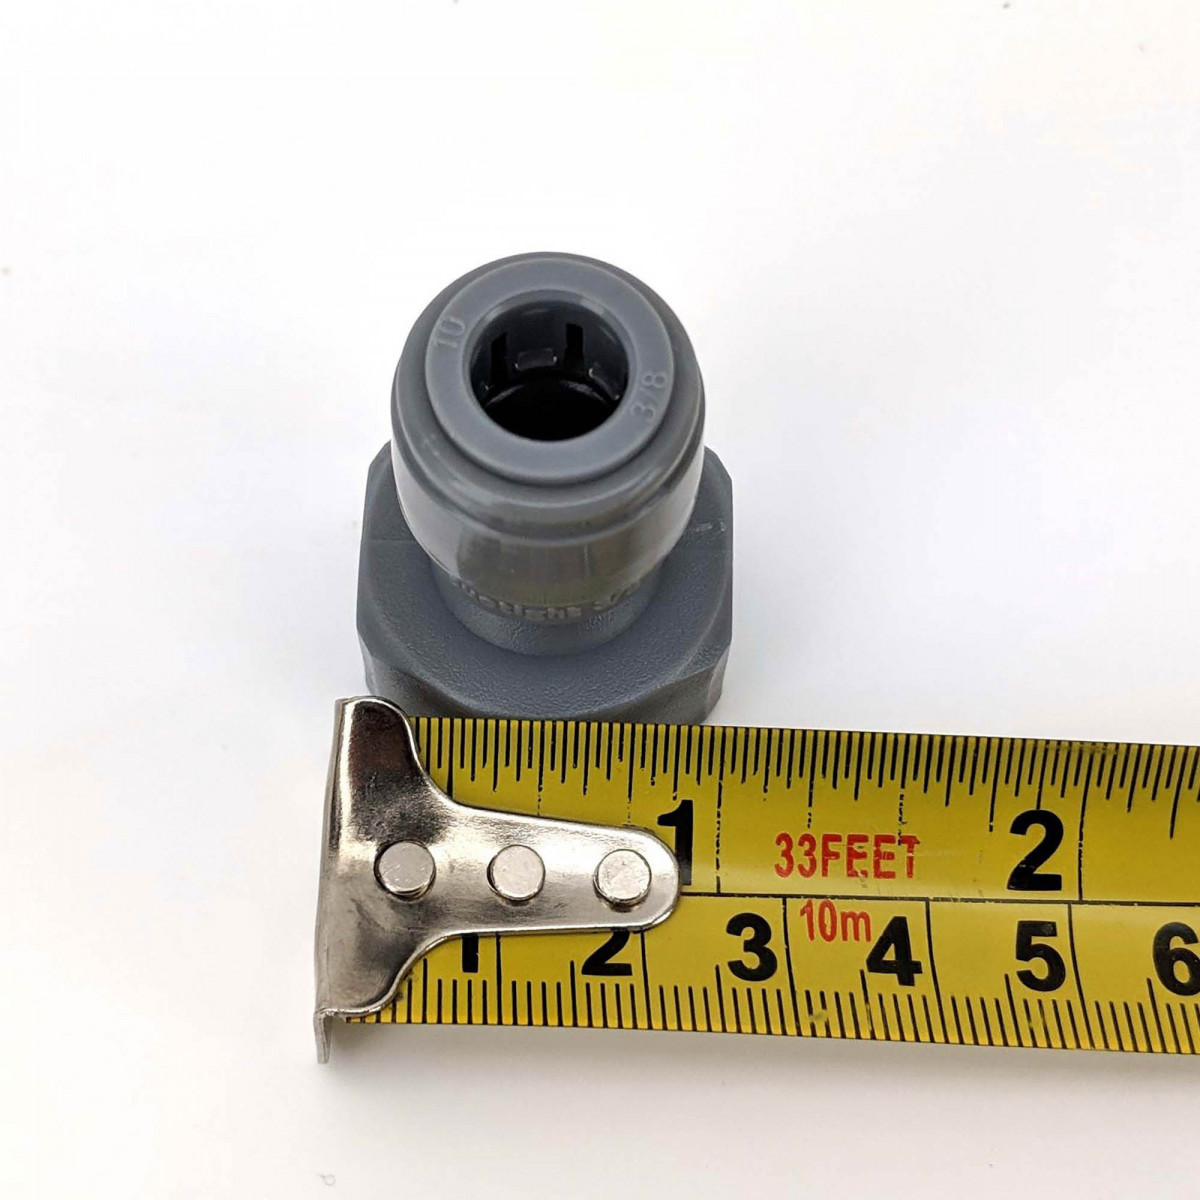 Duotight joiner 9.5 mm (3/8”) push-in fitting to 1/2"